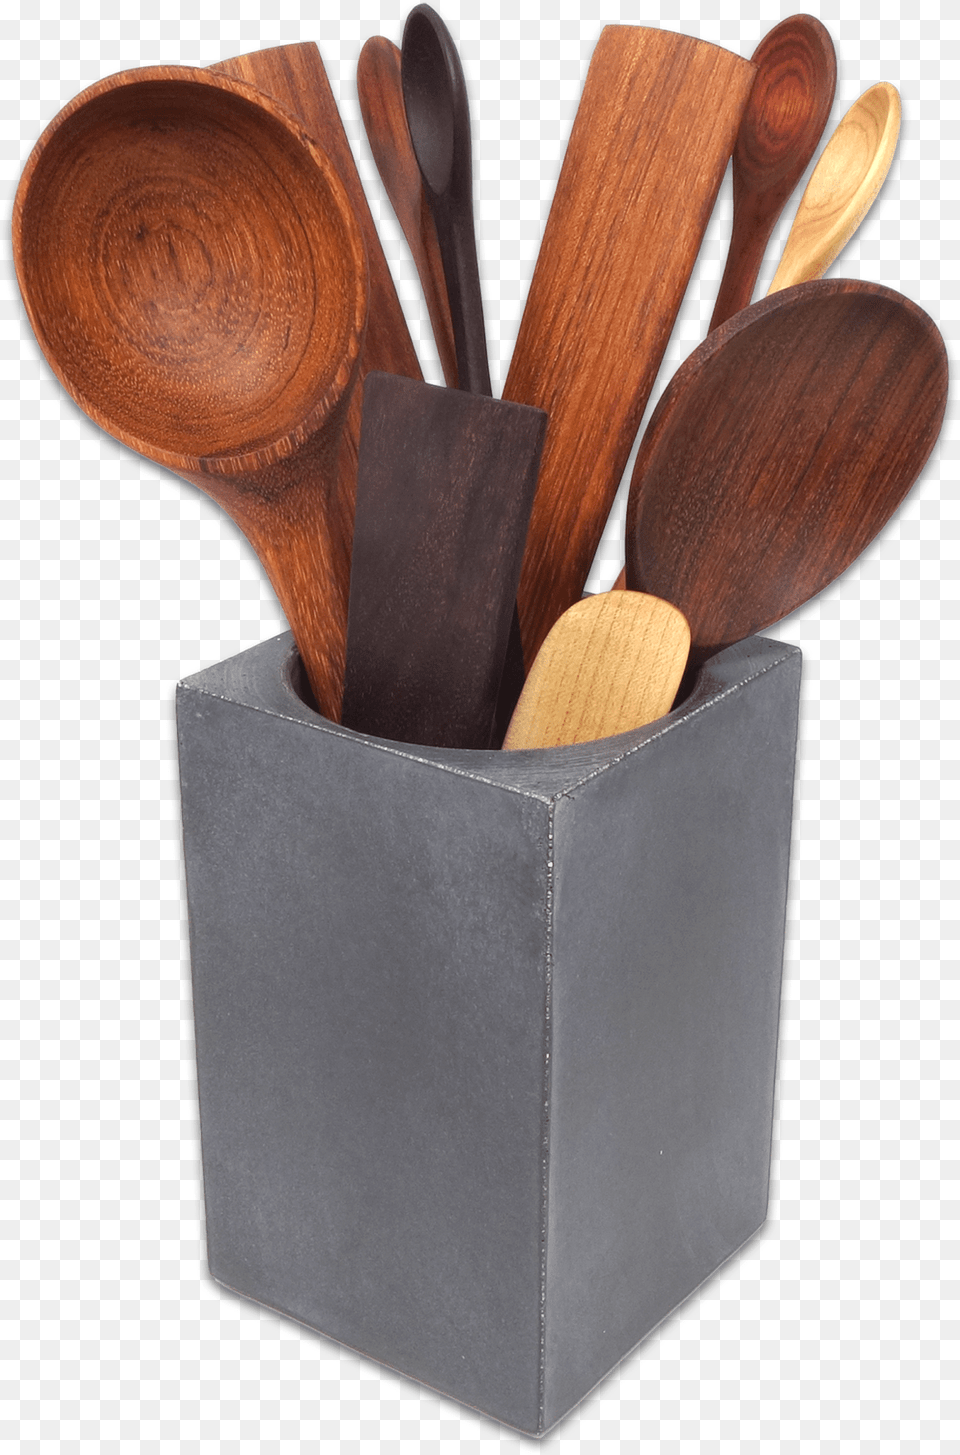 Class Lazyload Lazyload Mirage Cloudzoom Featured Image Wooden Spoon, Cutlery, Kitchen Utensil, Wooden Spoon Png